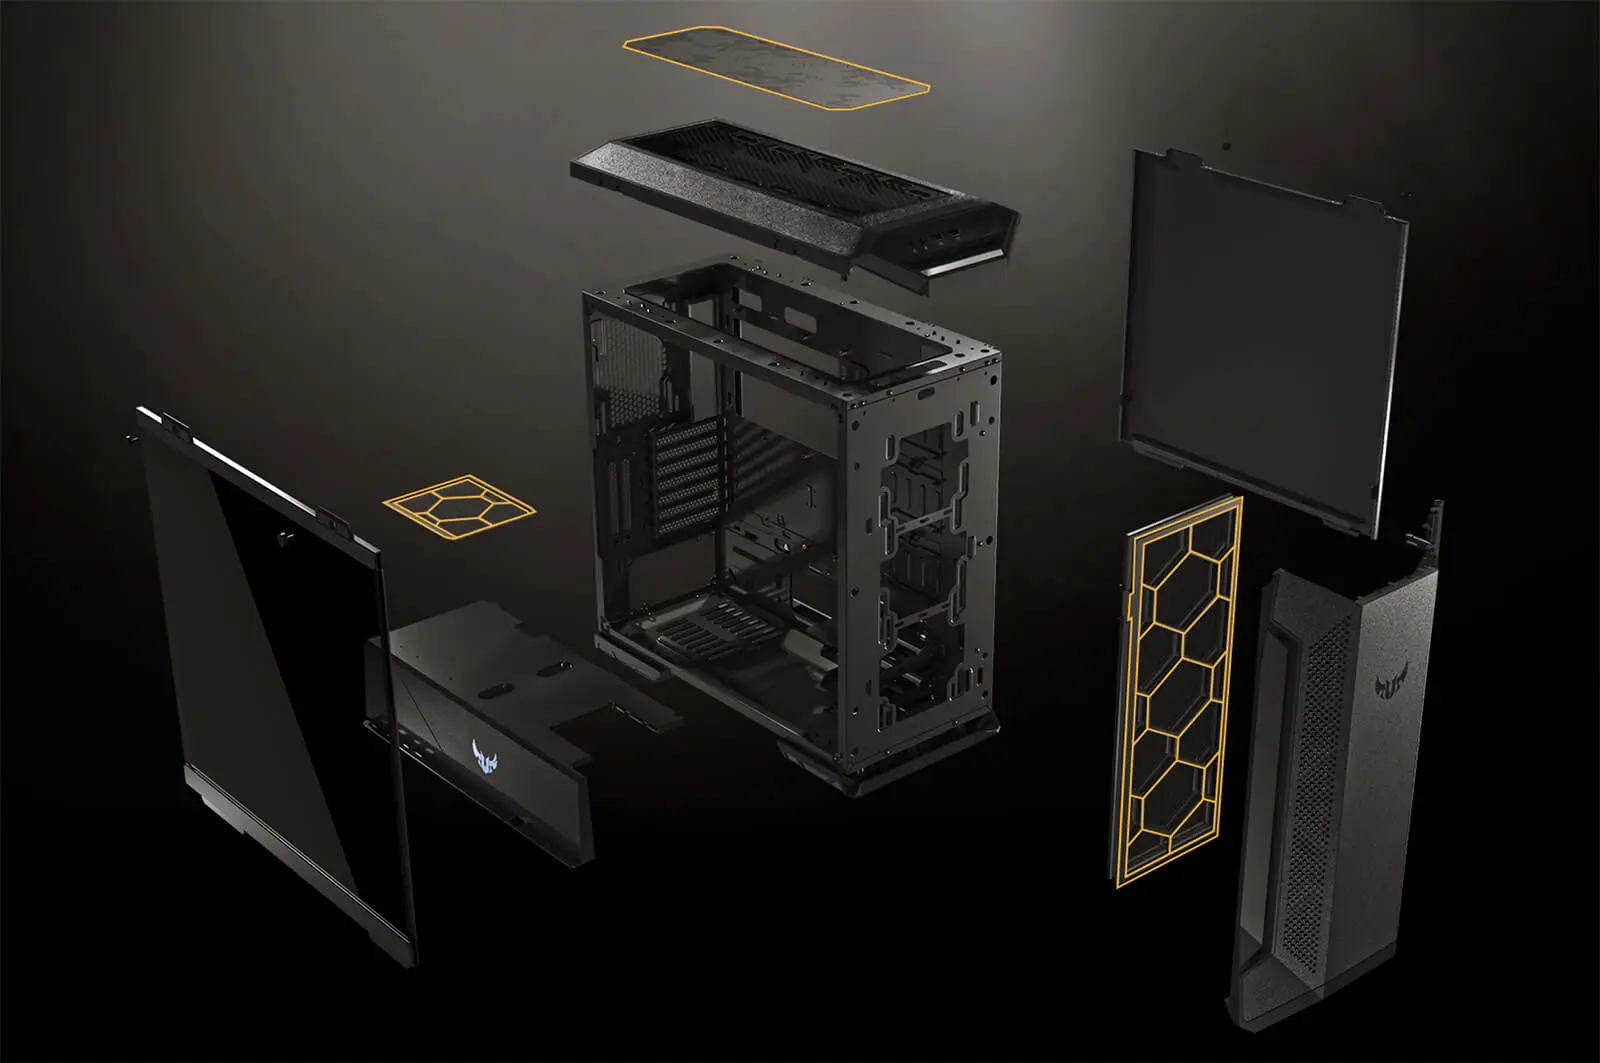 Asus Tuf Gaming Gt501vc Mid Tower Gaming Case Features 06